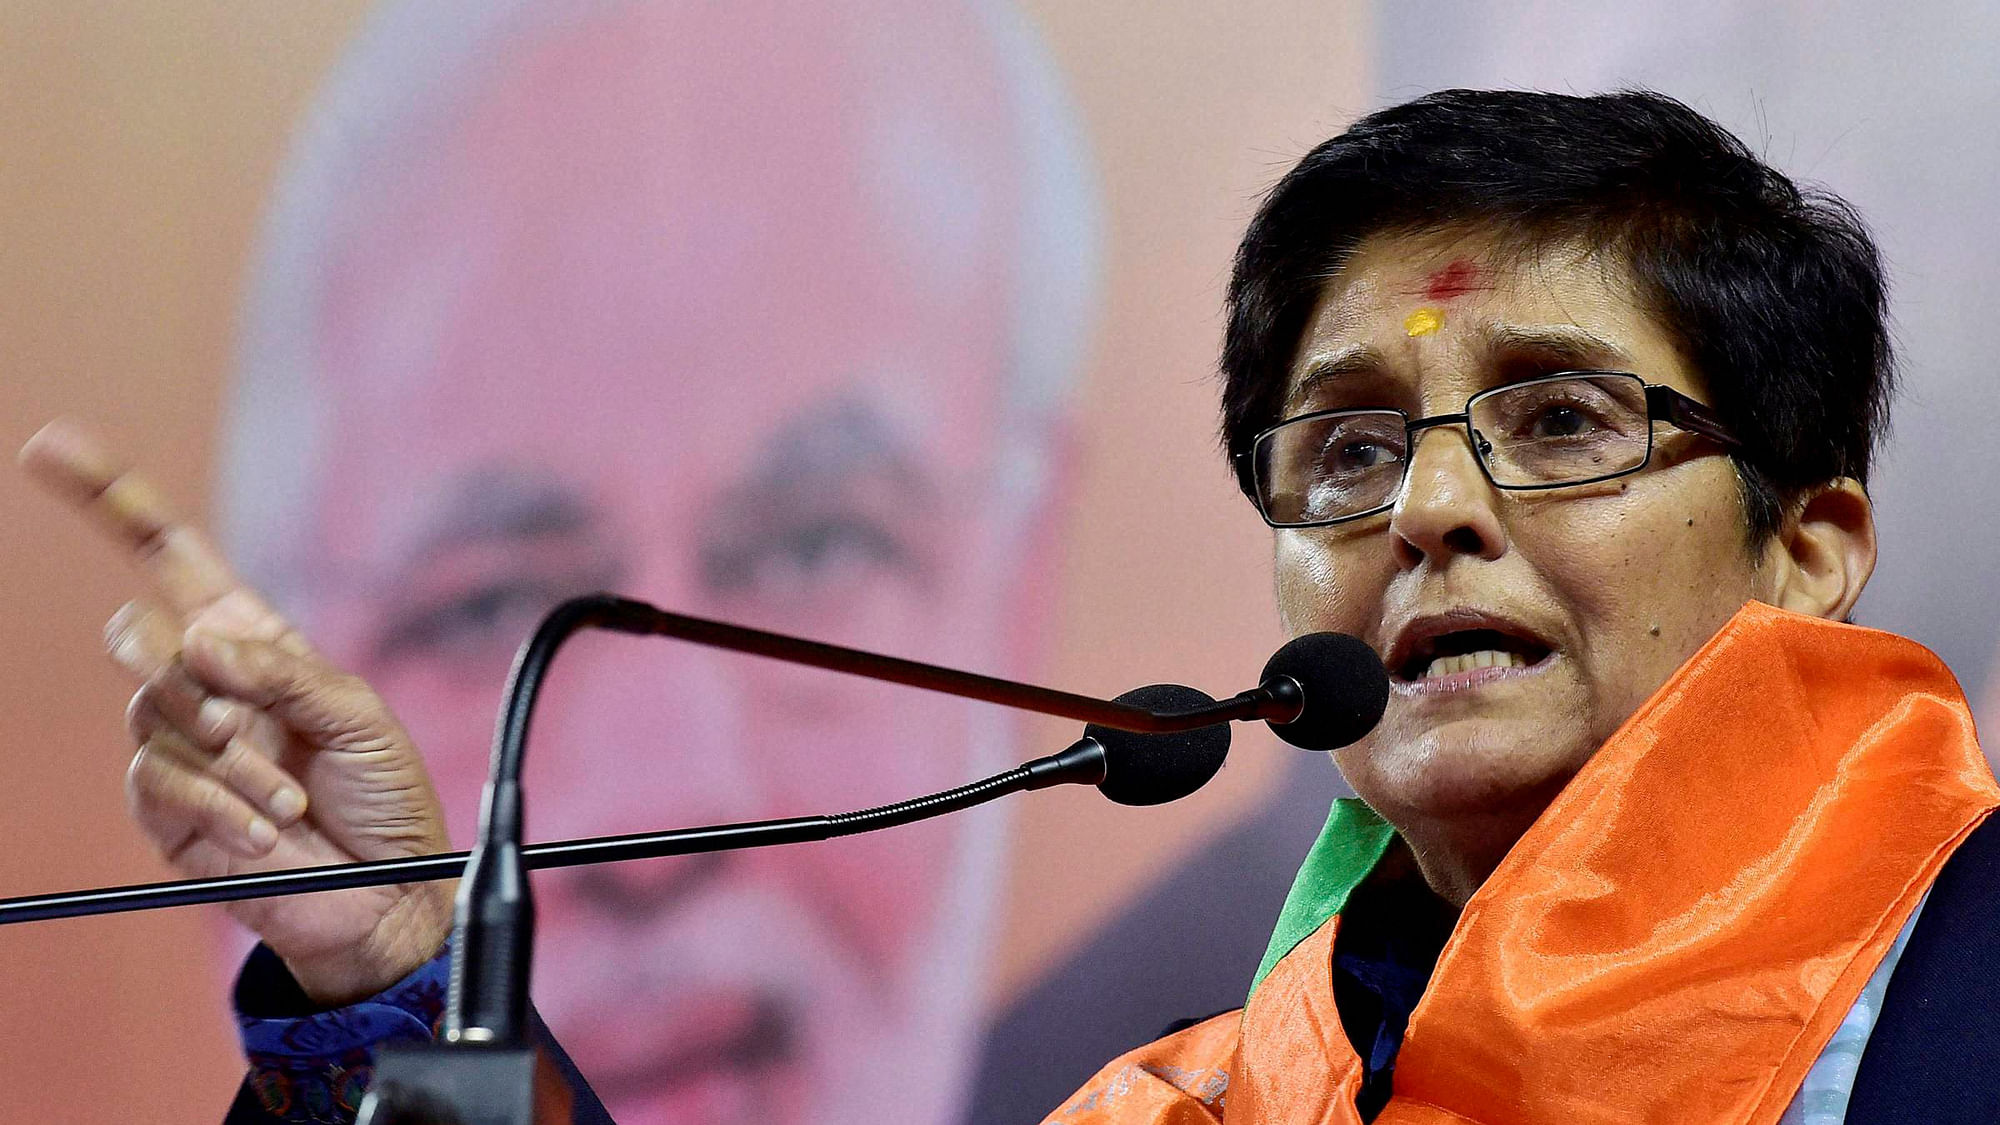 Puducherry Lt Governor Kiran Bedi said that she will quit in May 2018, after completing two years in office. (Photo: PTI)